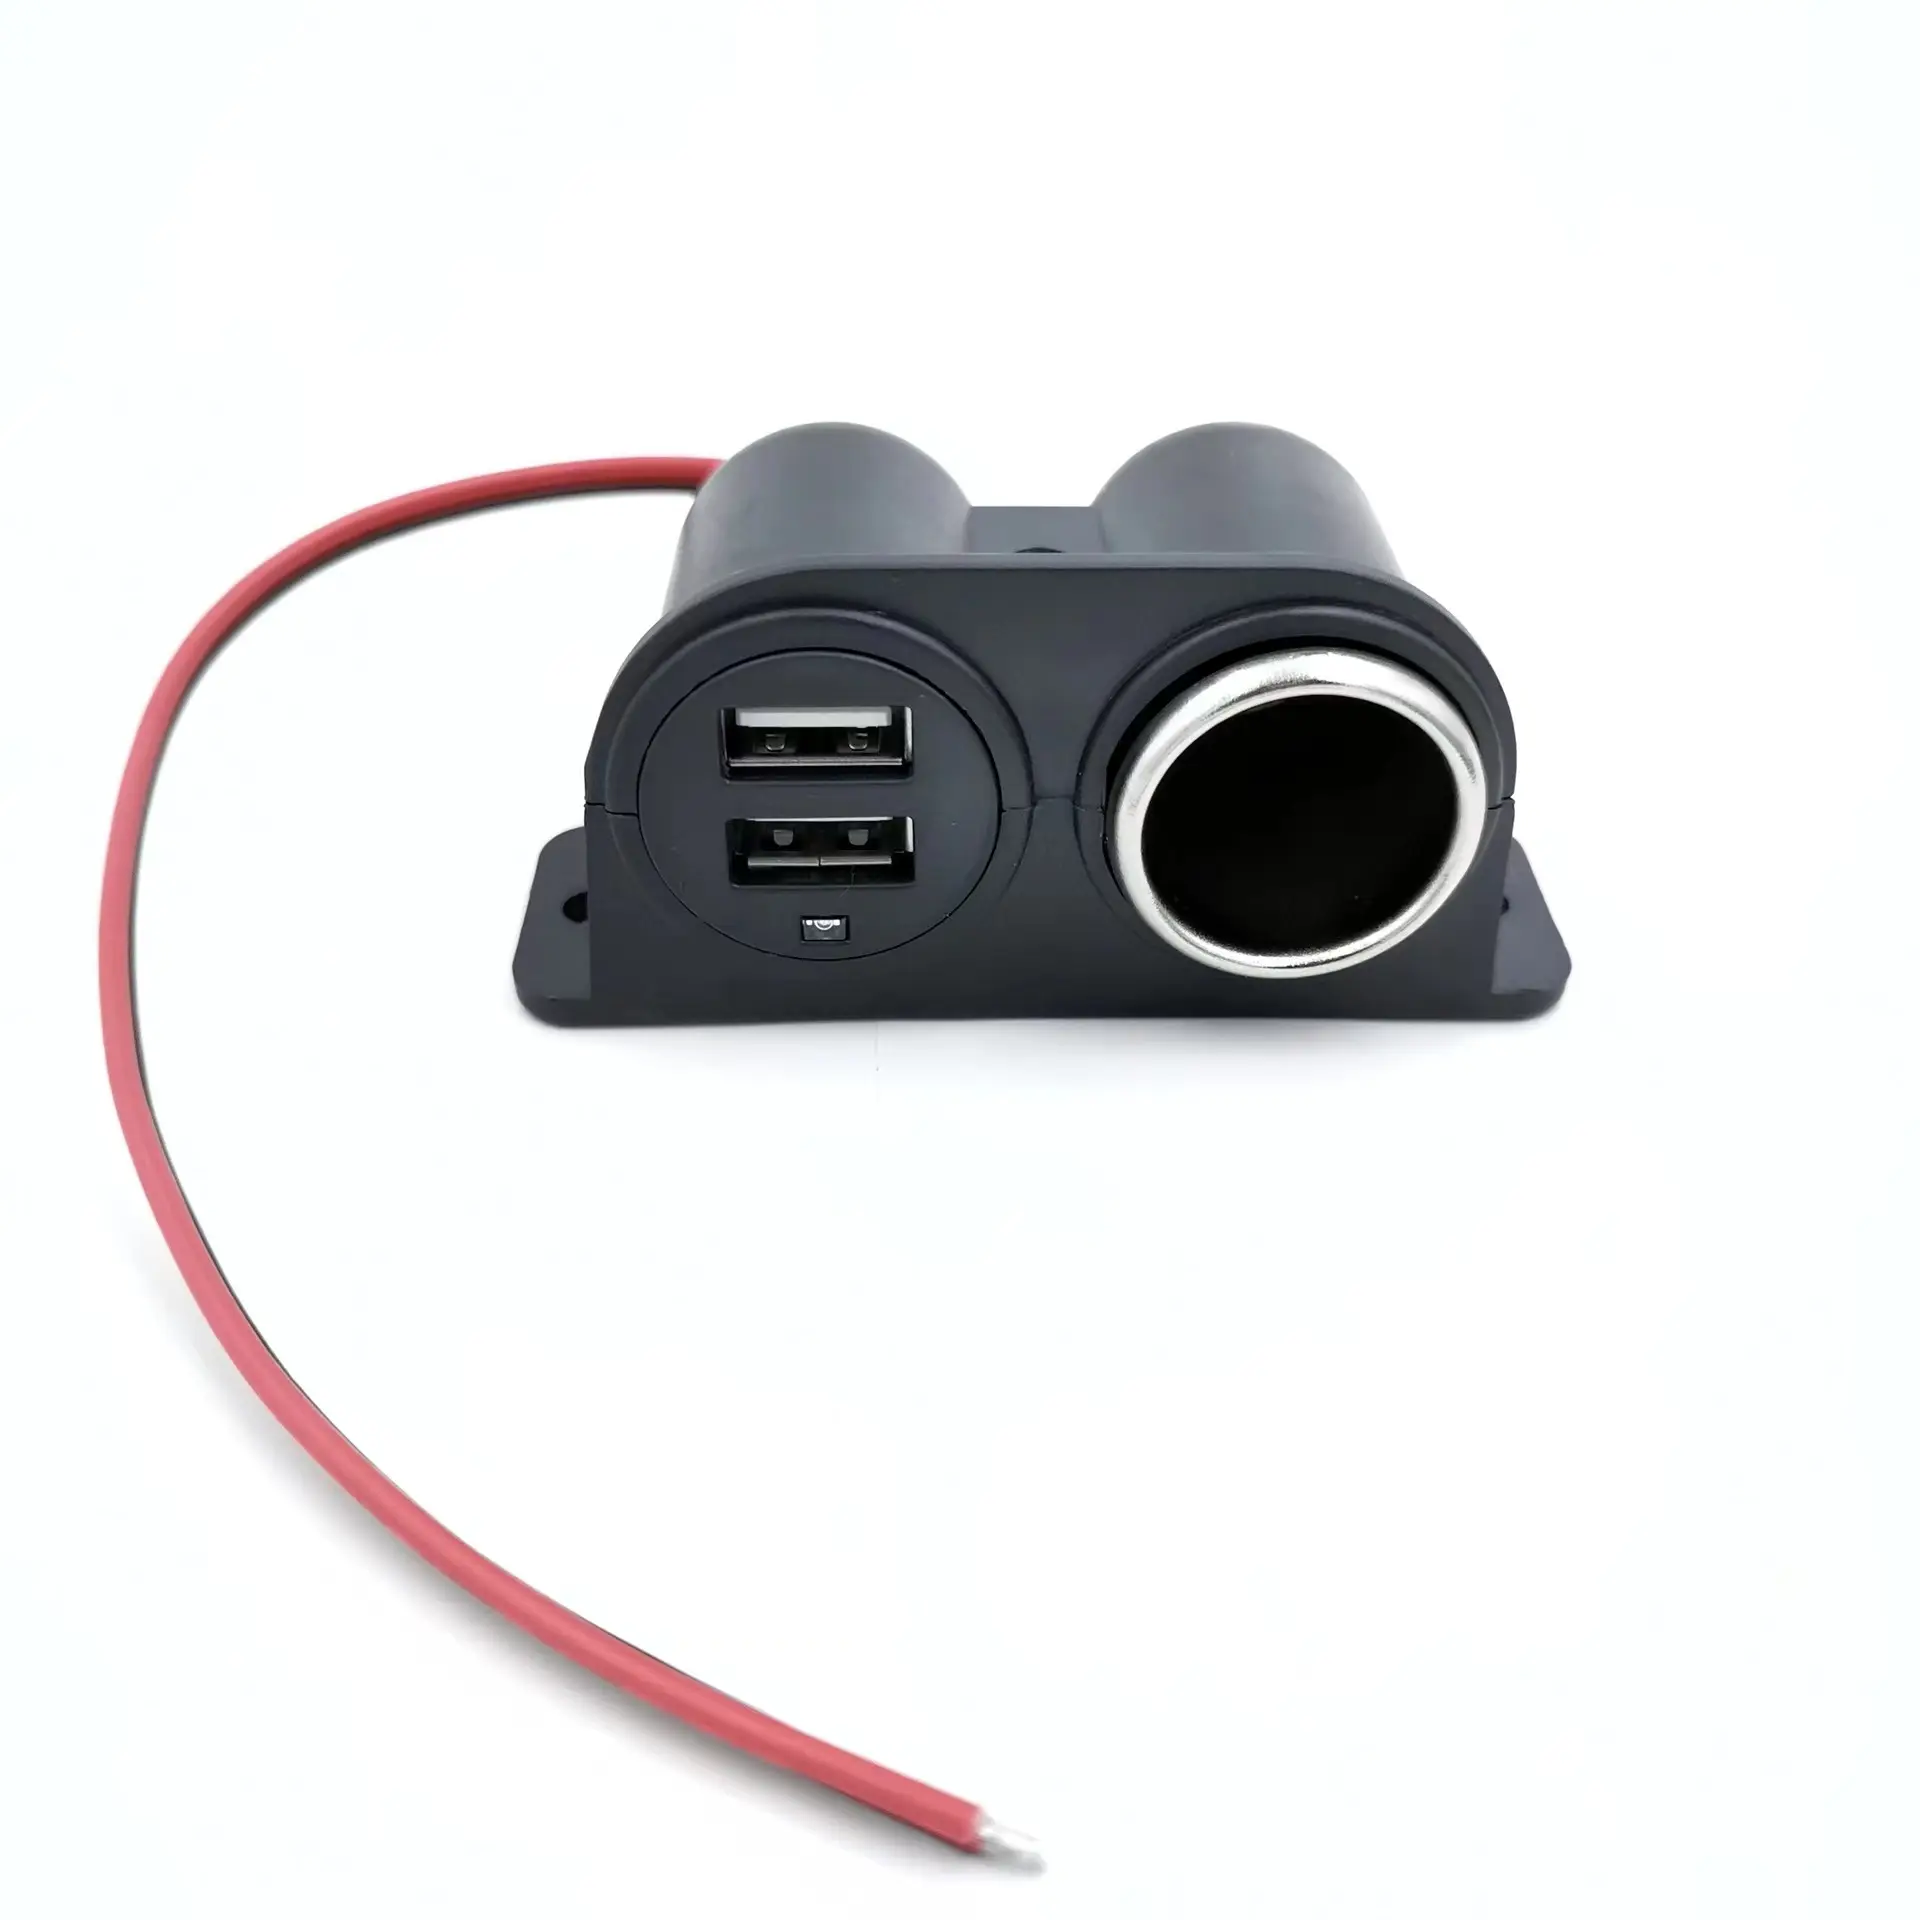 Dual USB Outlet Cigarette Lighter Socket Splitter 12V 4.2A Replacement with Blade Fuse for RV Boat Marine